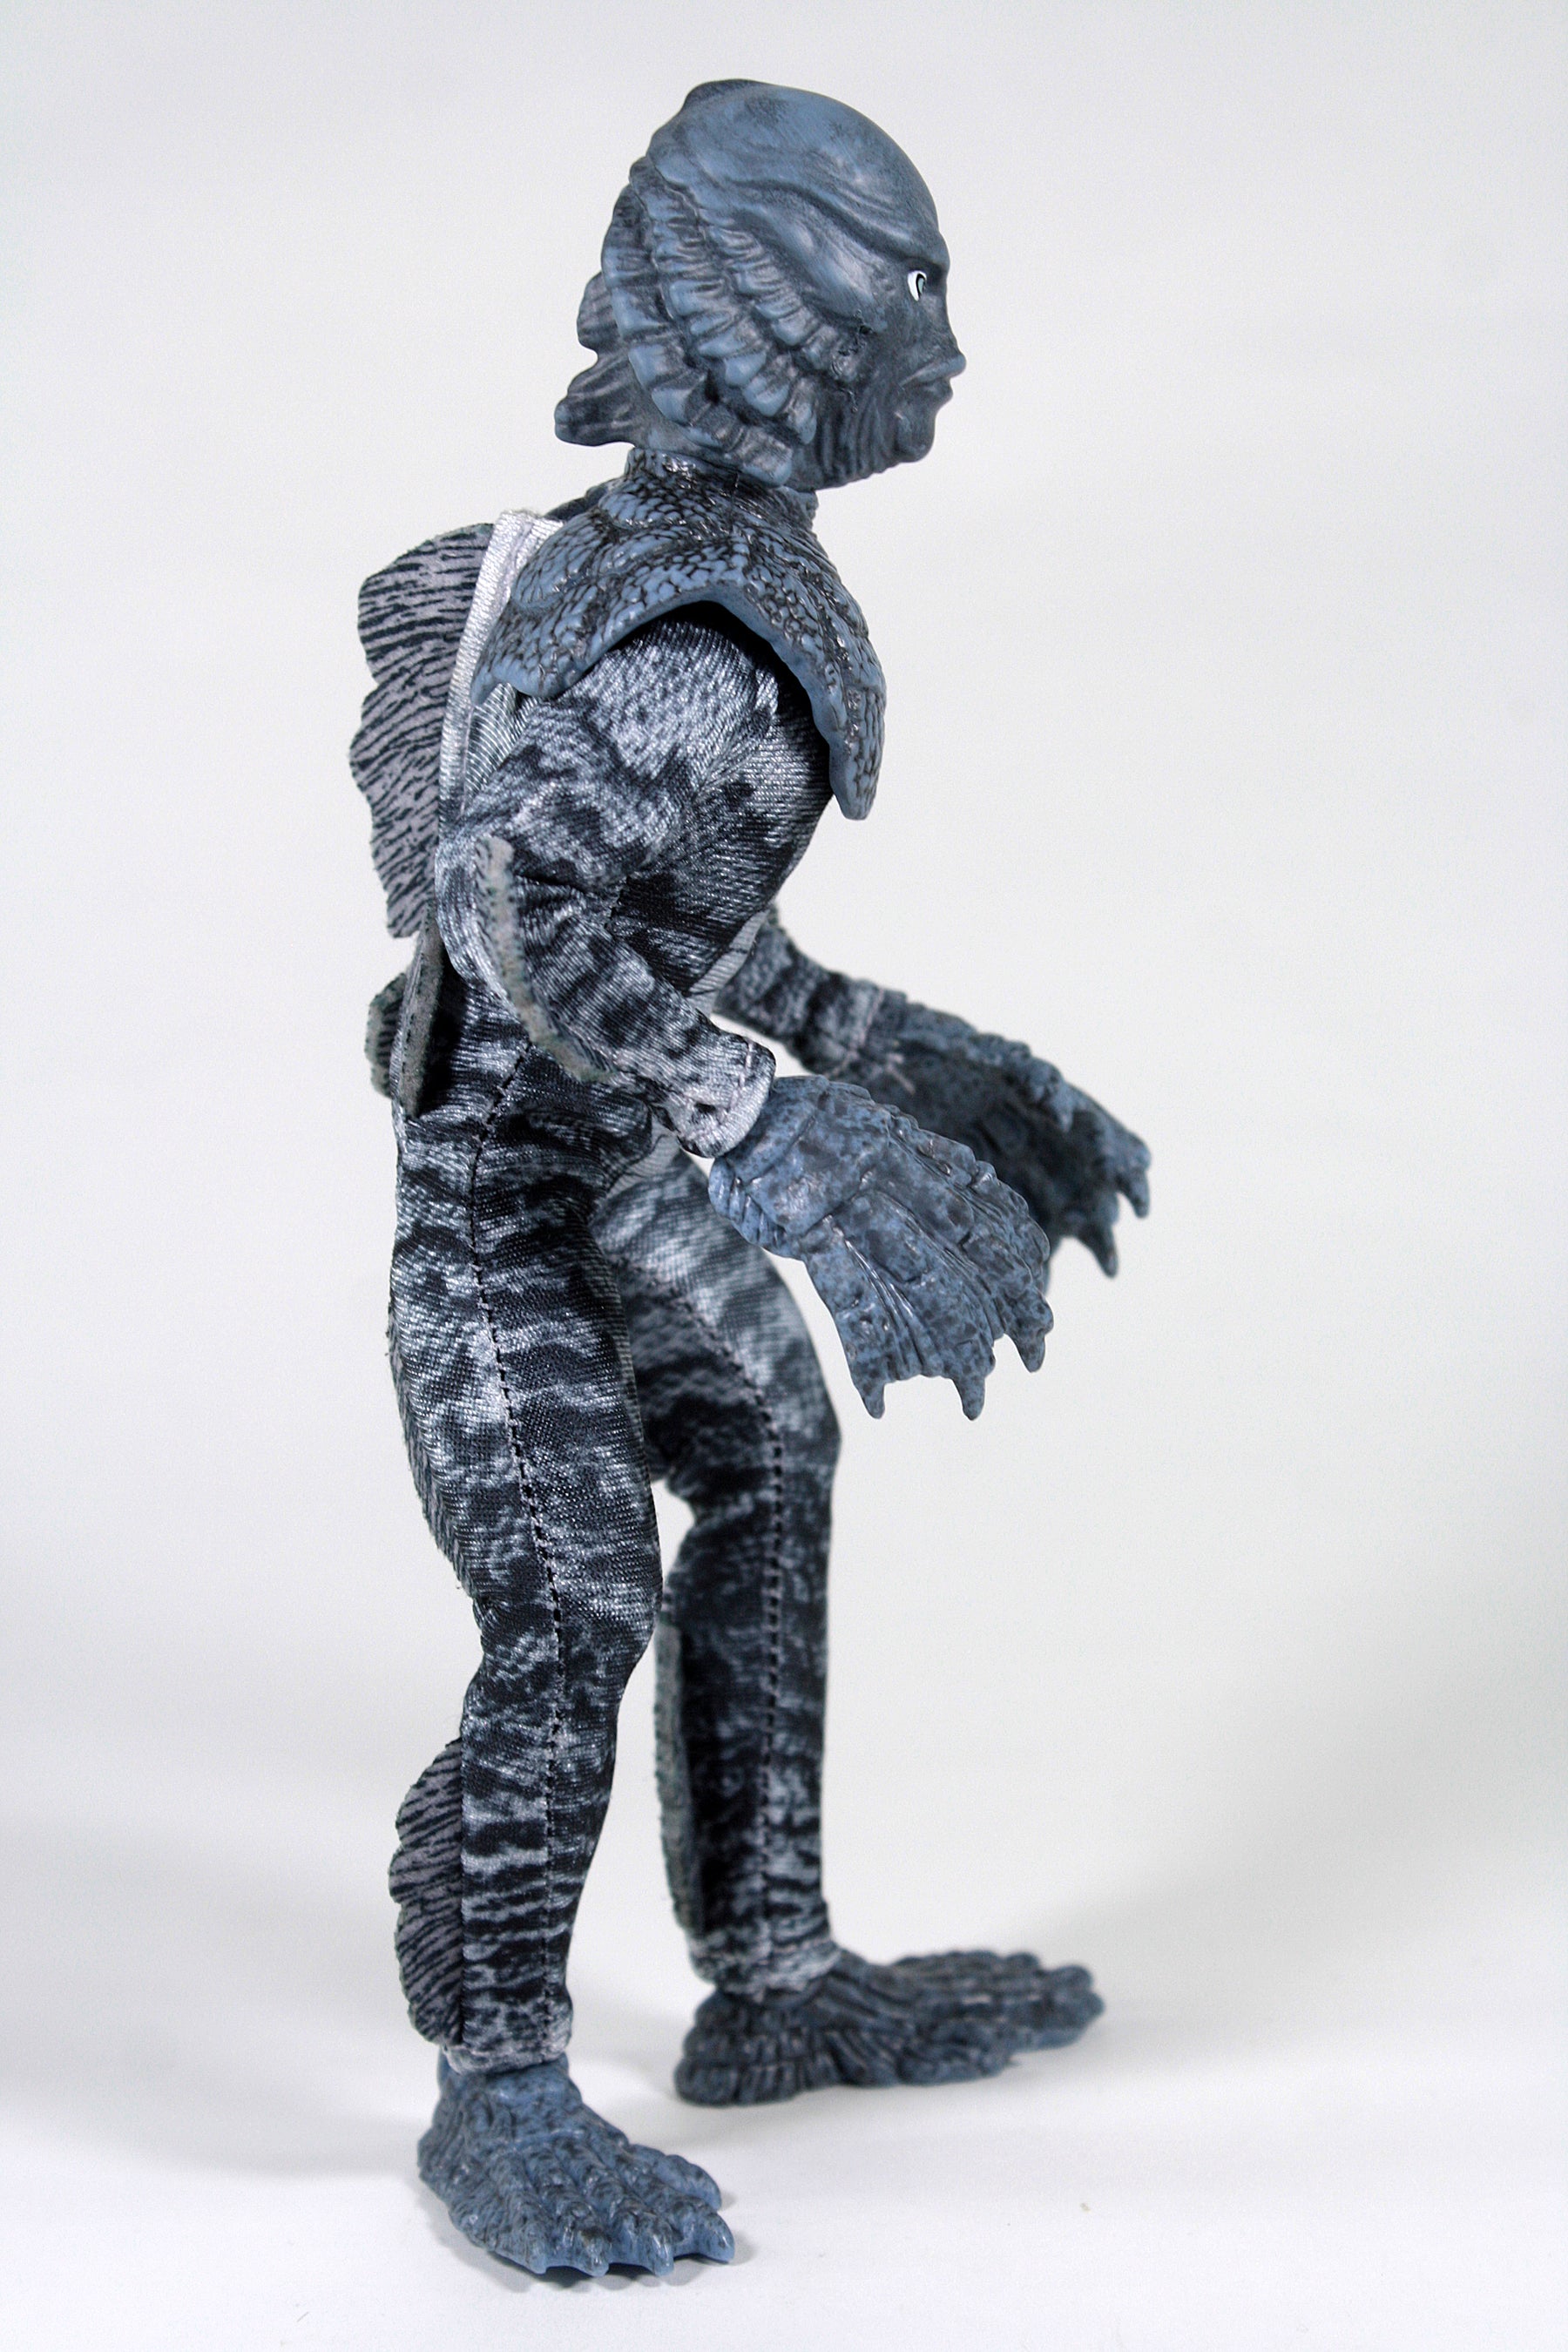 Mego Horror Wave 14 - B&W Creature from the Black Lagoon 8" Action Figure